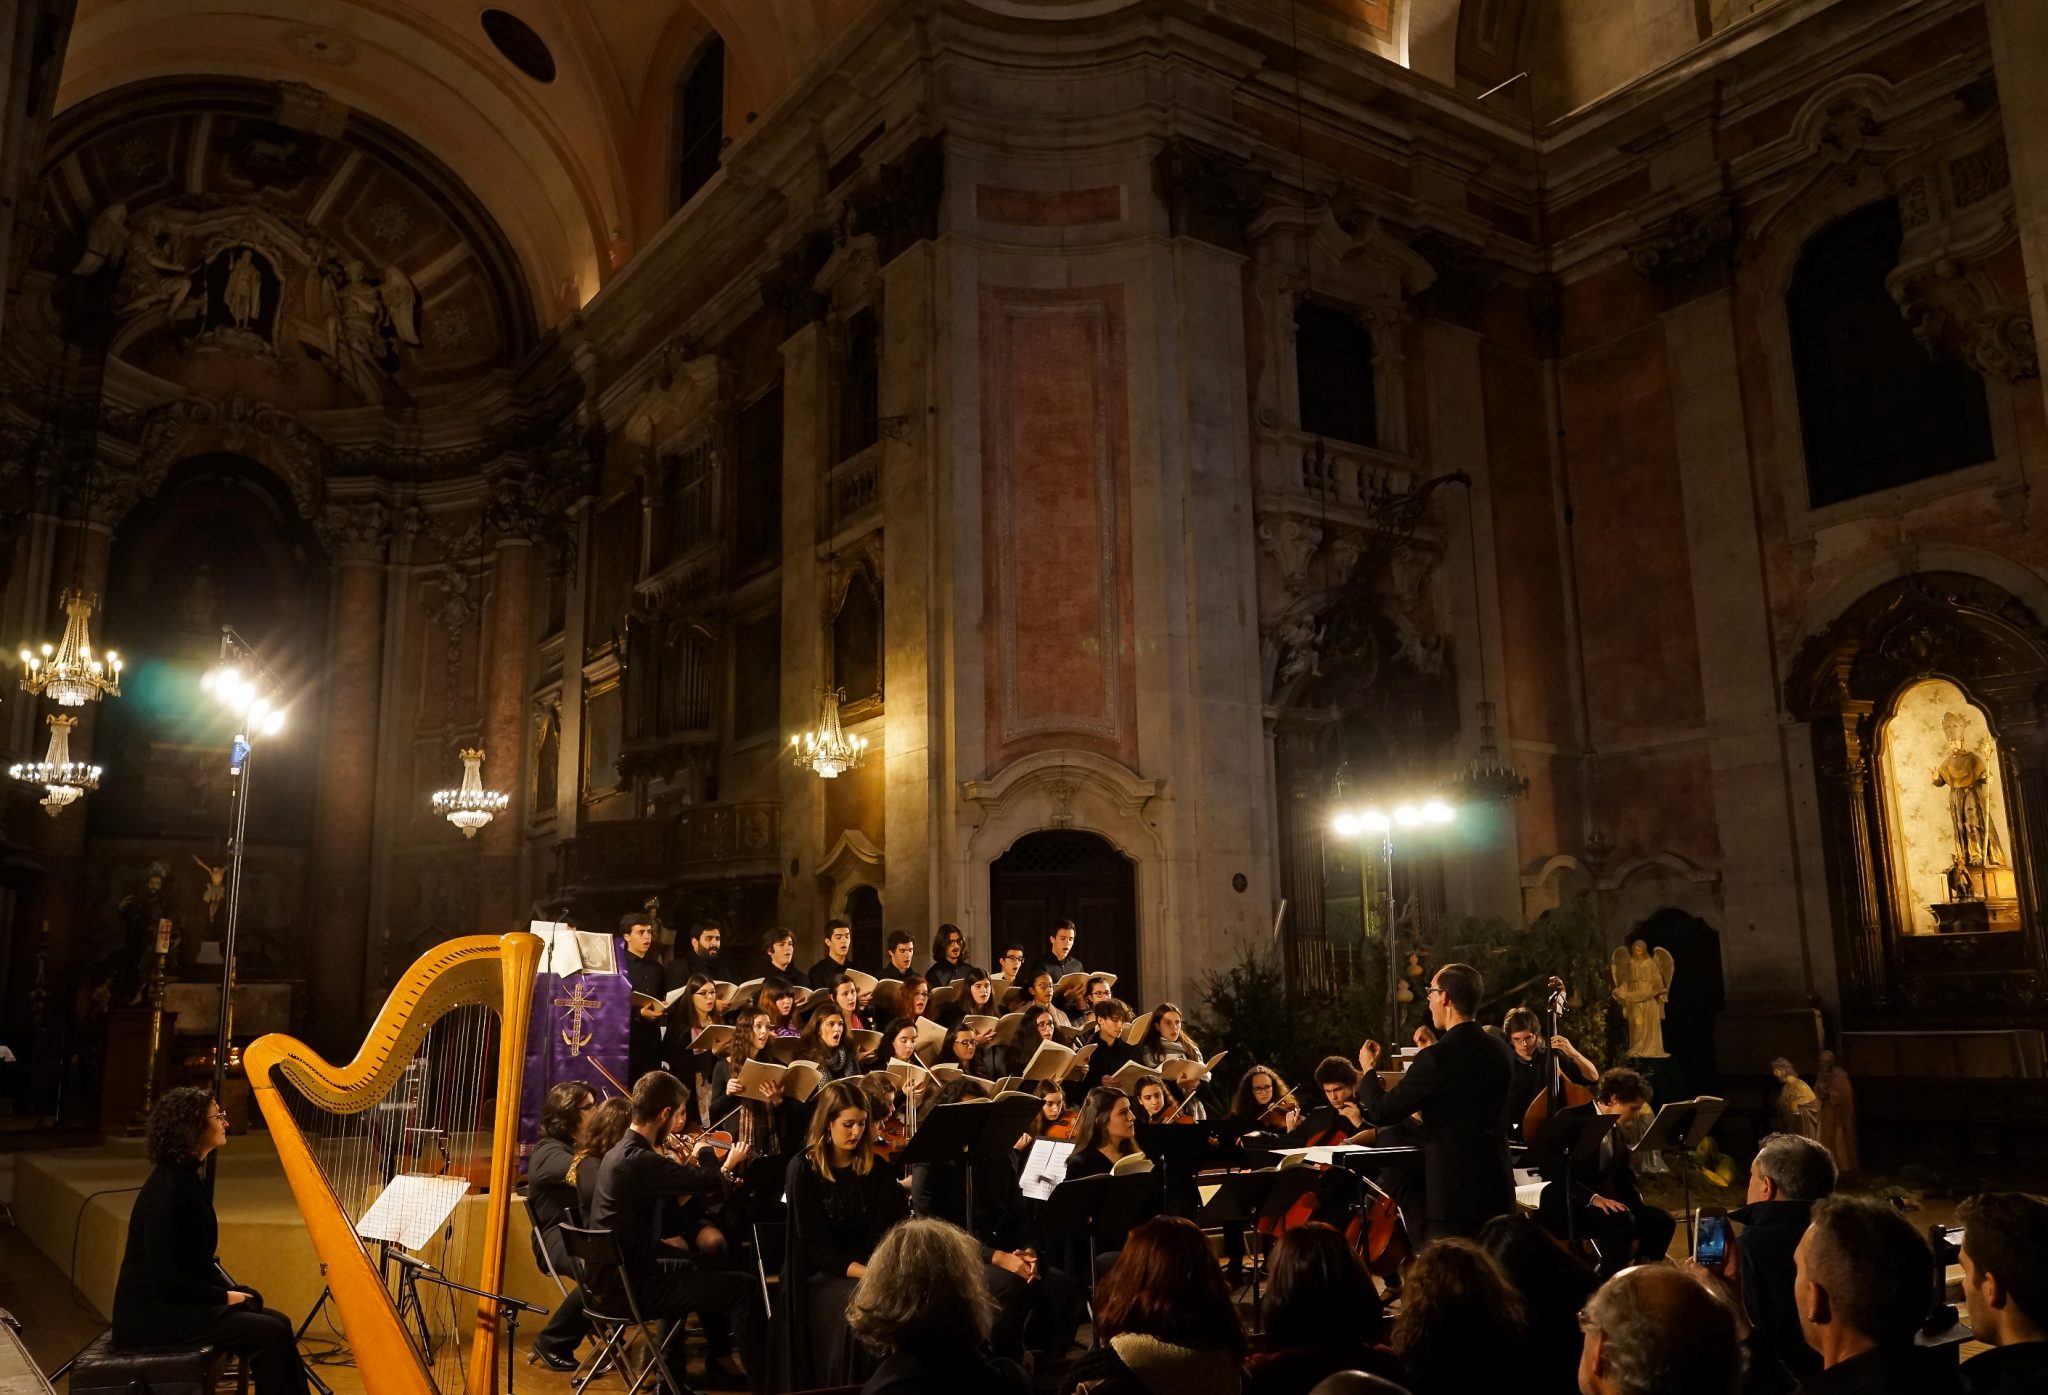 In a church setting, a concert that includes a harp, string instruments and a choir